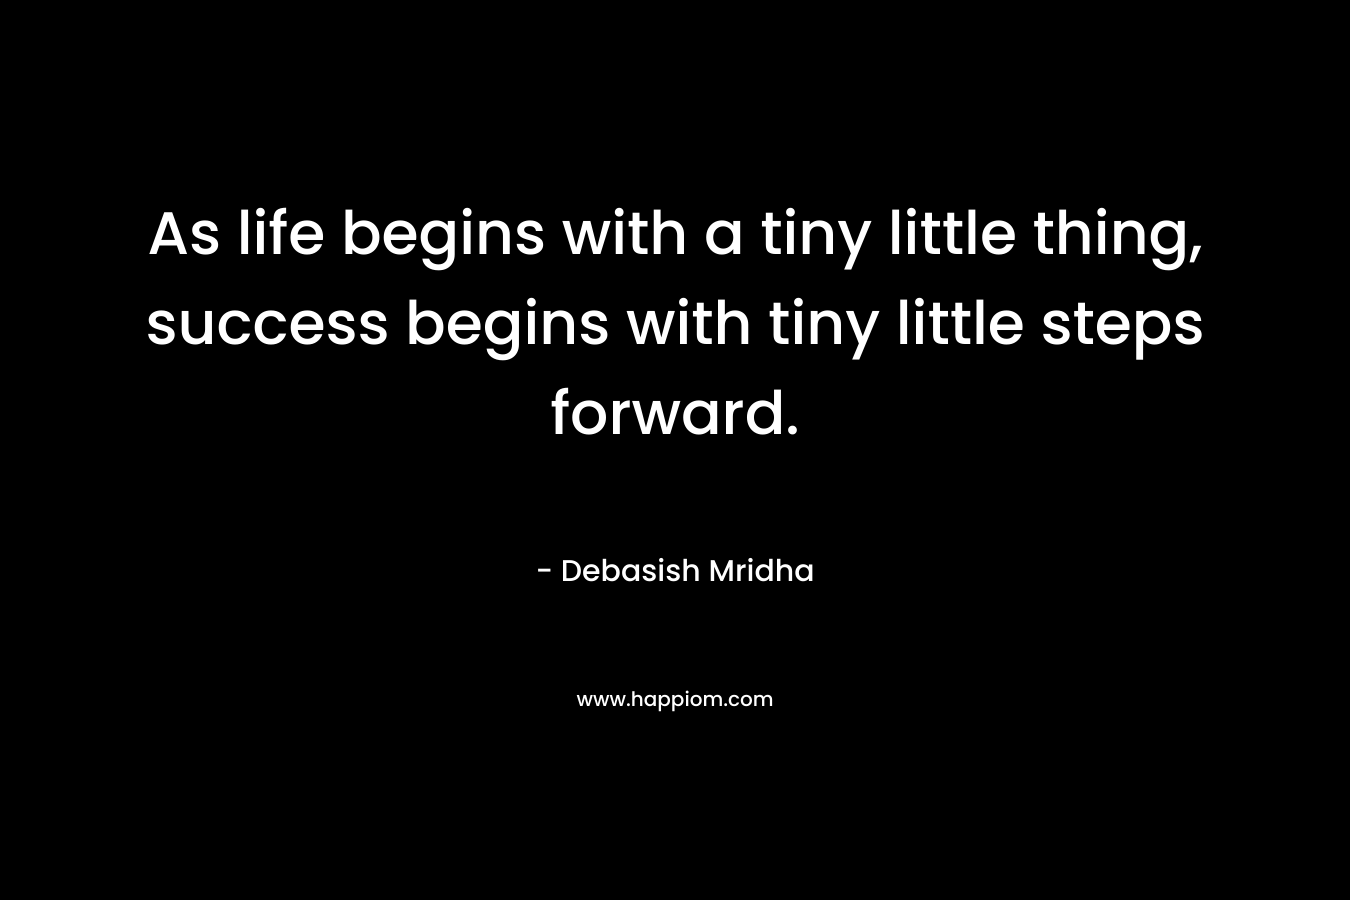 As life begins with a tiny little thing, success begins with tiny little steps forward.